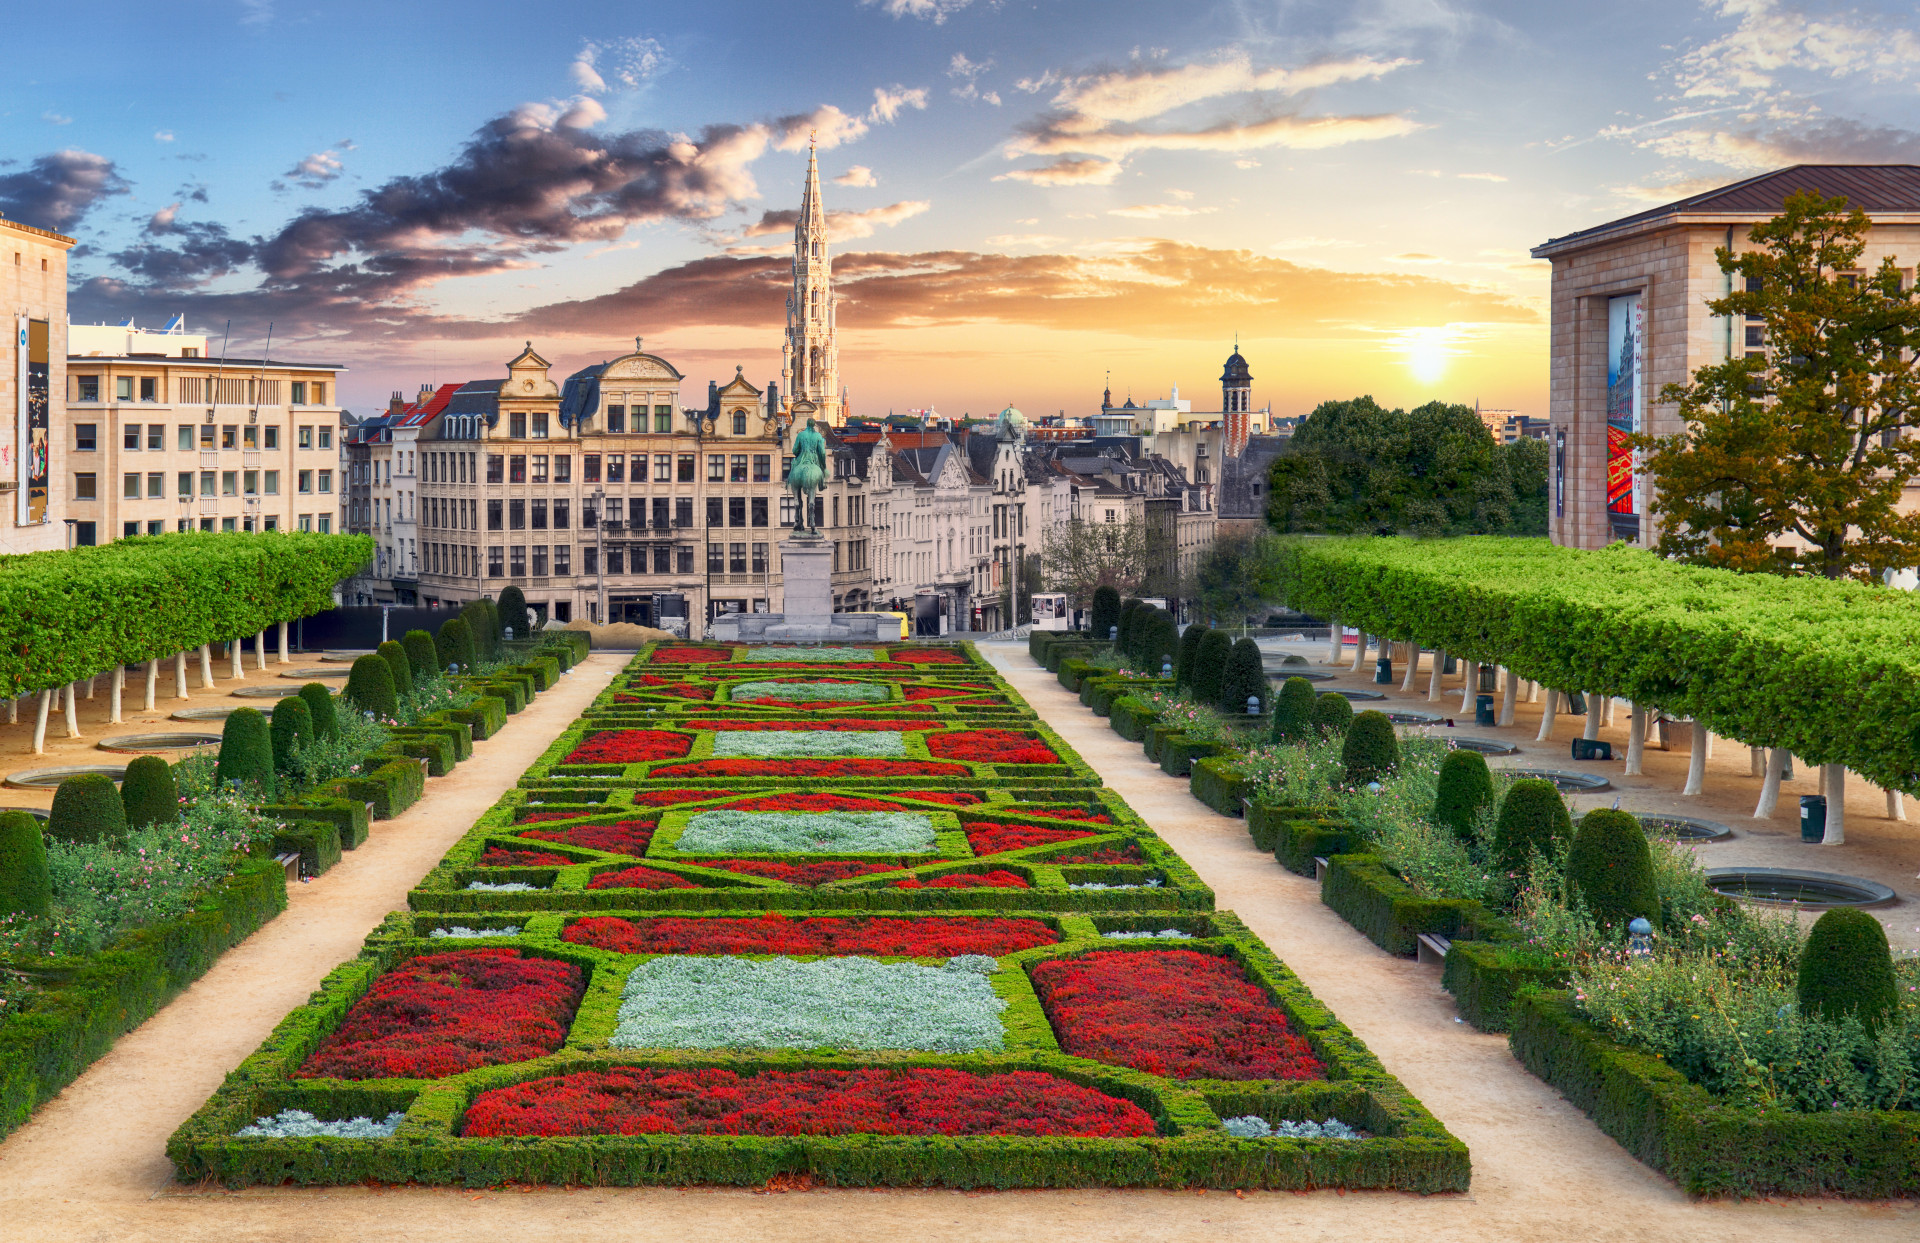 <p>Belgium might be one of Europe's smallest countries, but it's definitely not one you should underestimate! Although we love it for its incredible chocolate, there are plenty of other good reasons to visit the country.</p><p>Want to know why you should put it on your travel bucket list? Click through this gallery to find out!</p><p>You may also like:<a href="https://www.starsinsider.com/n/129710?utm_source=msn.com&utm_medium=display&utm_campaign=referral_description&utm_content=305869v3en-in"> 25 things that annoy flight attendants </a></p>